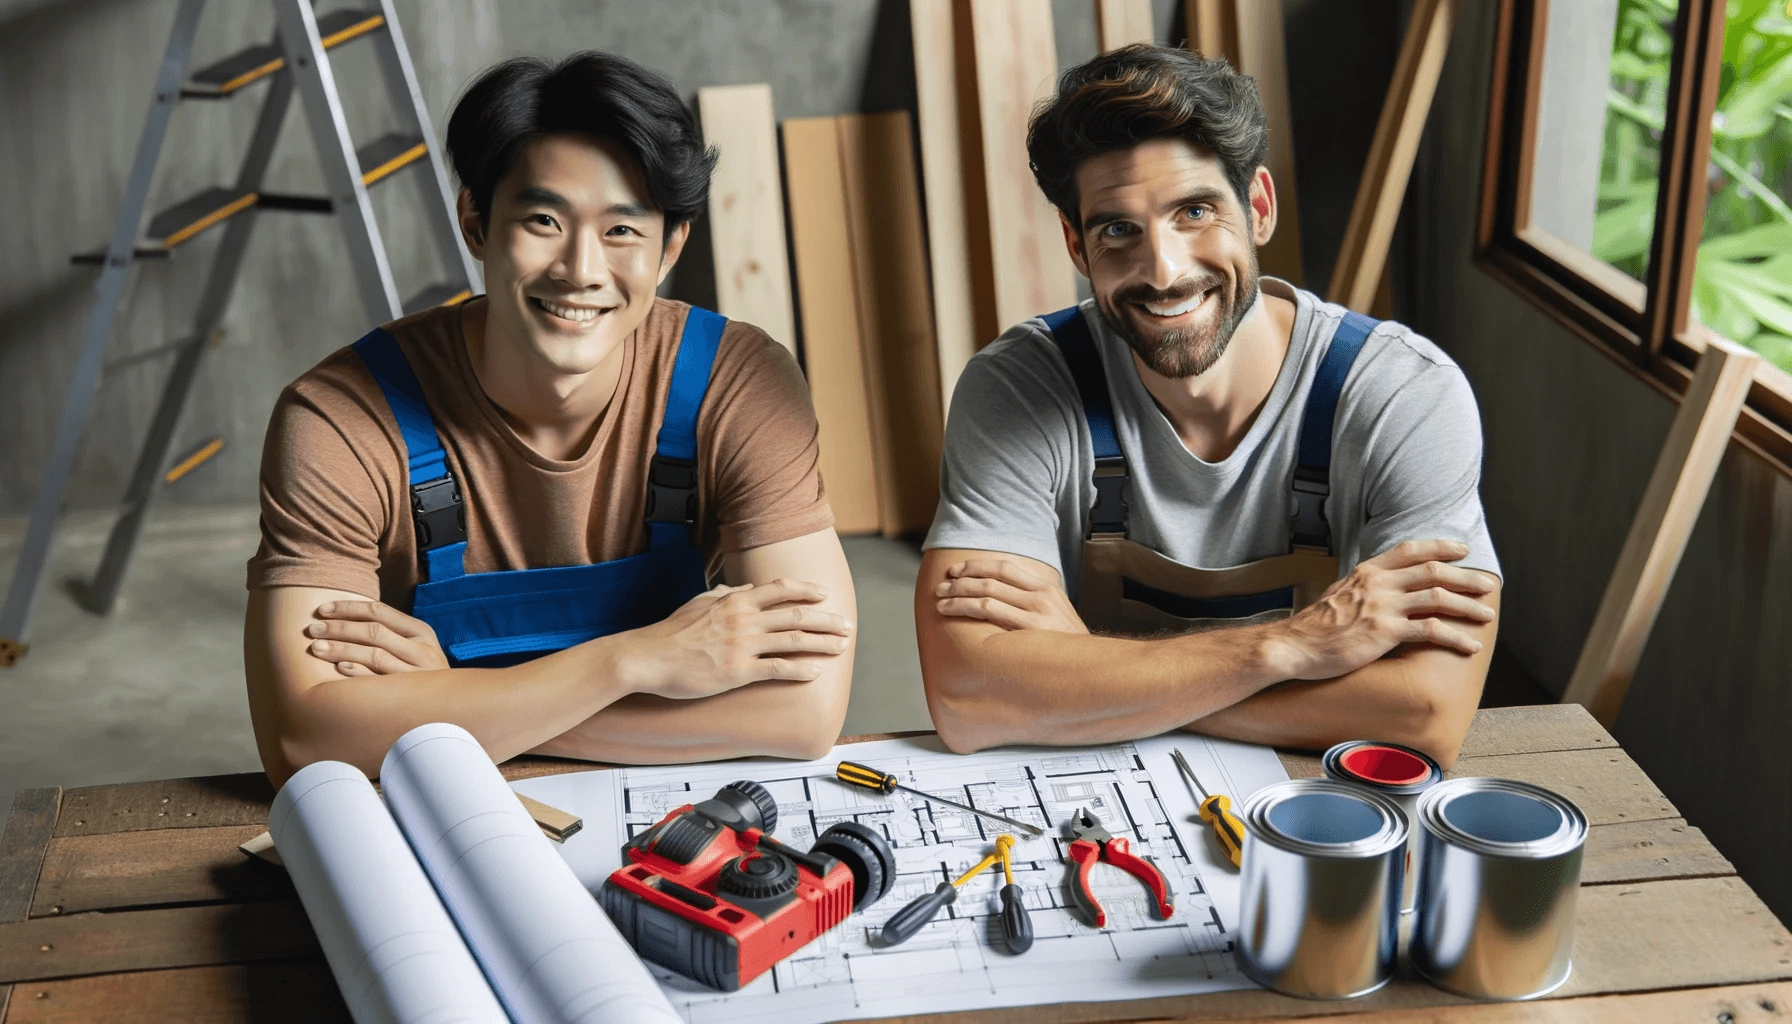 Graphic of two smiling contractors sitting near blueprints and tools